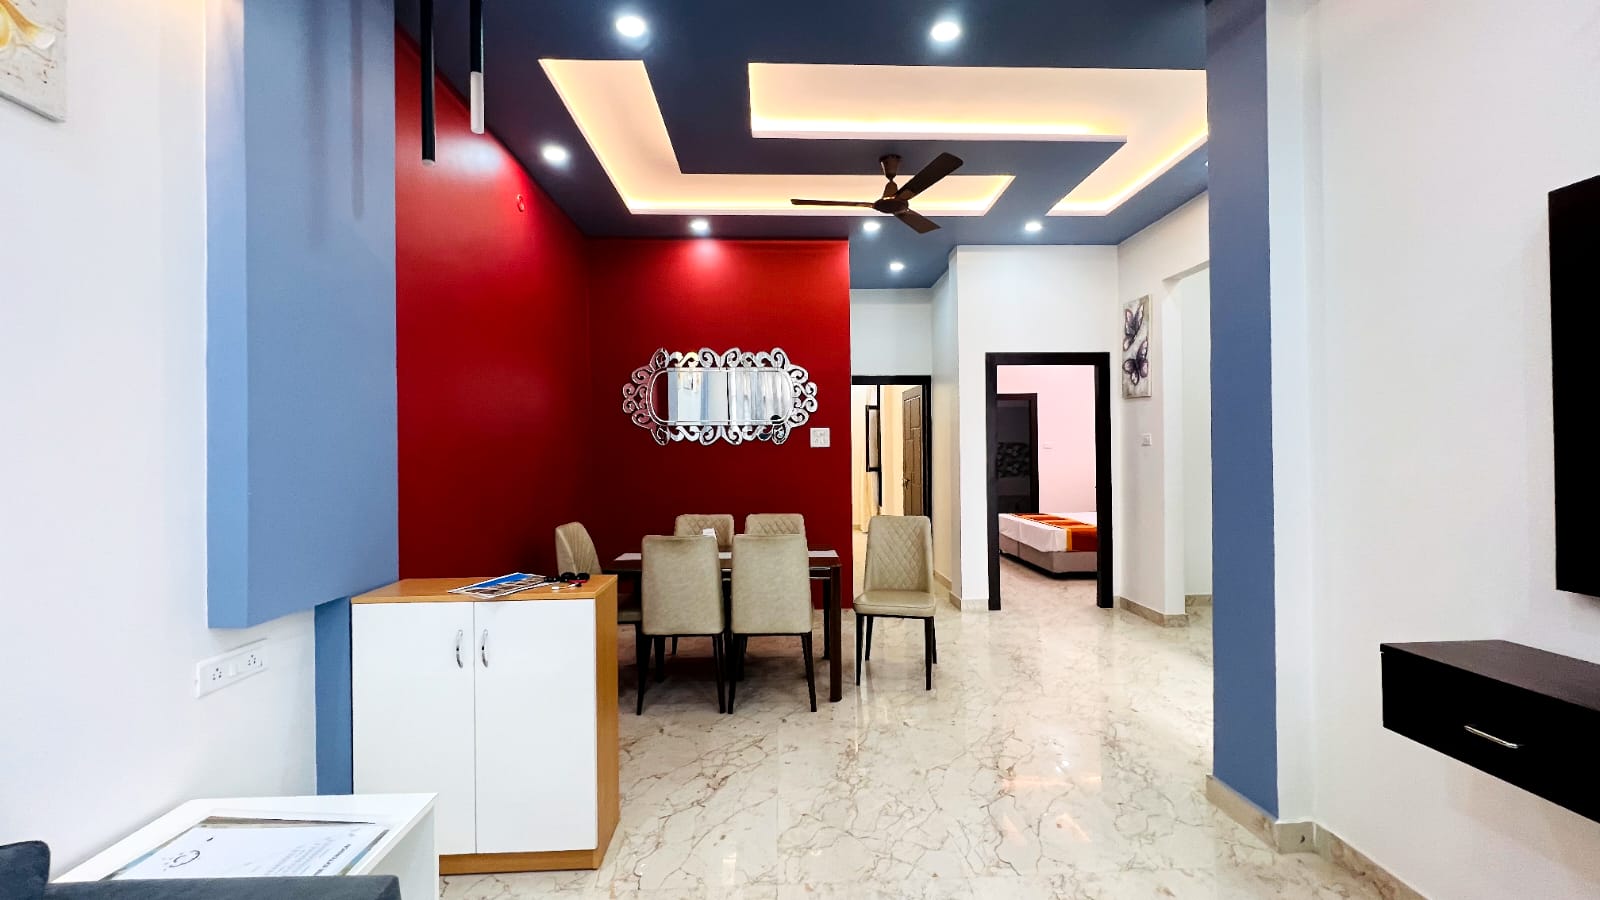 3 BHK Ready to move in residential house for sale in Indiranagar, Lucknow